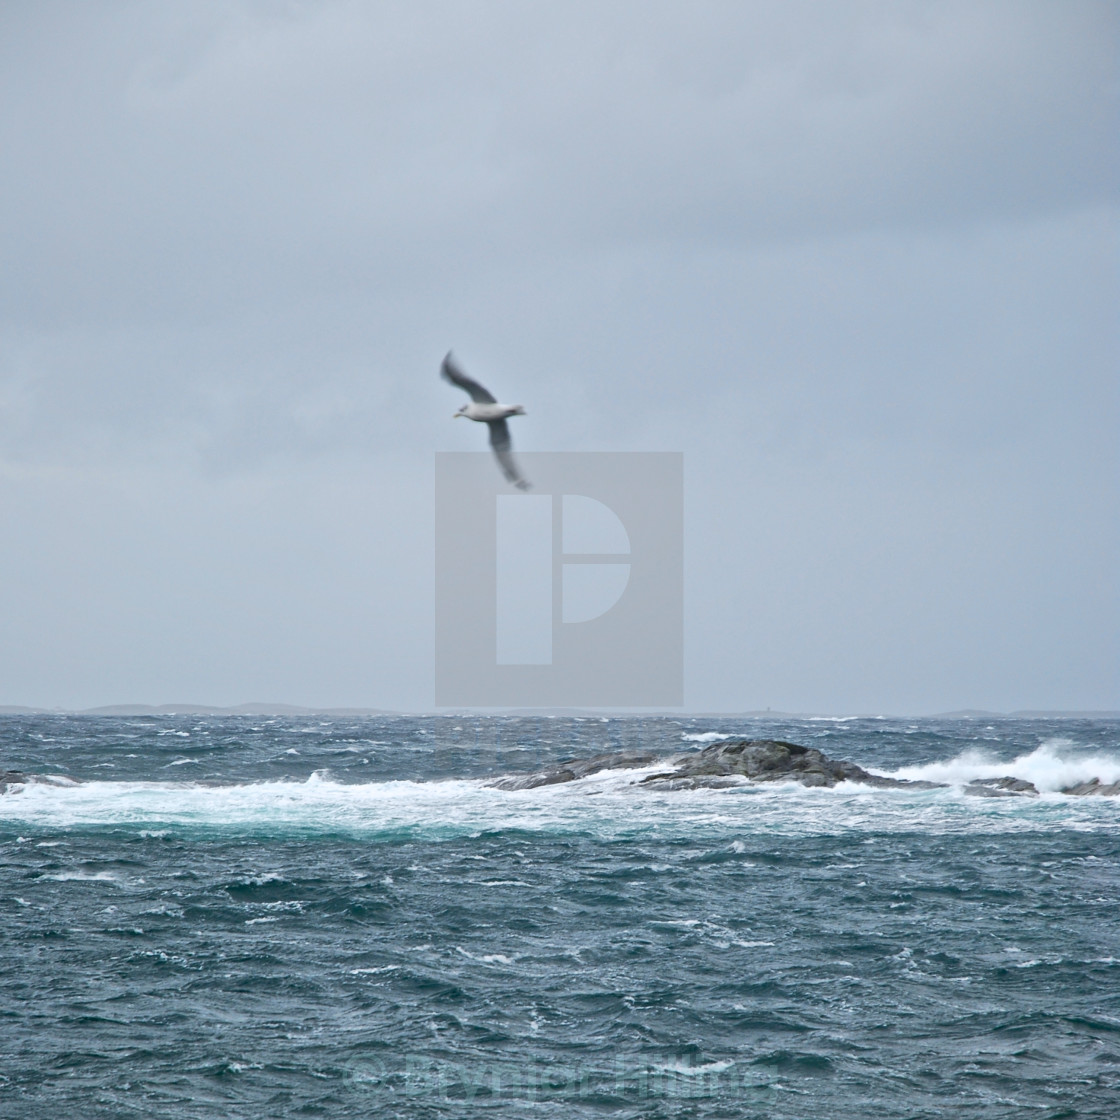 "Seagull over stormy sea" stock image